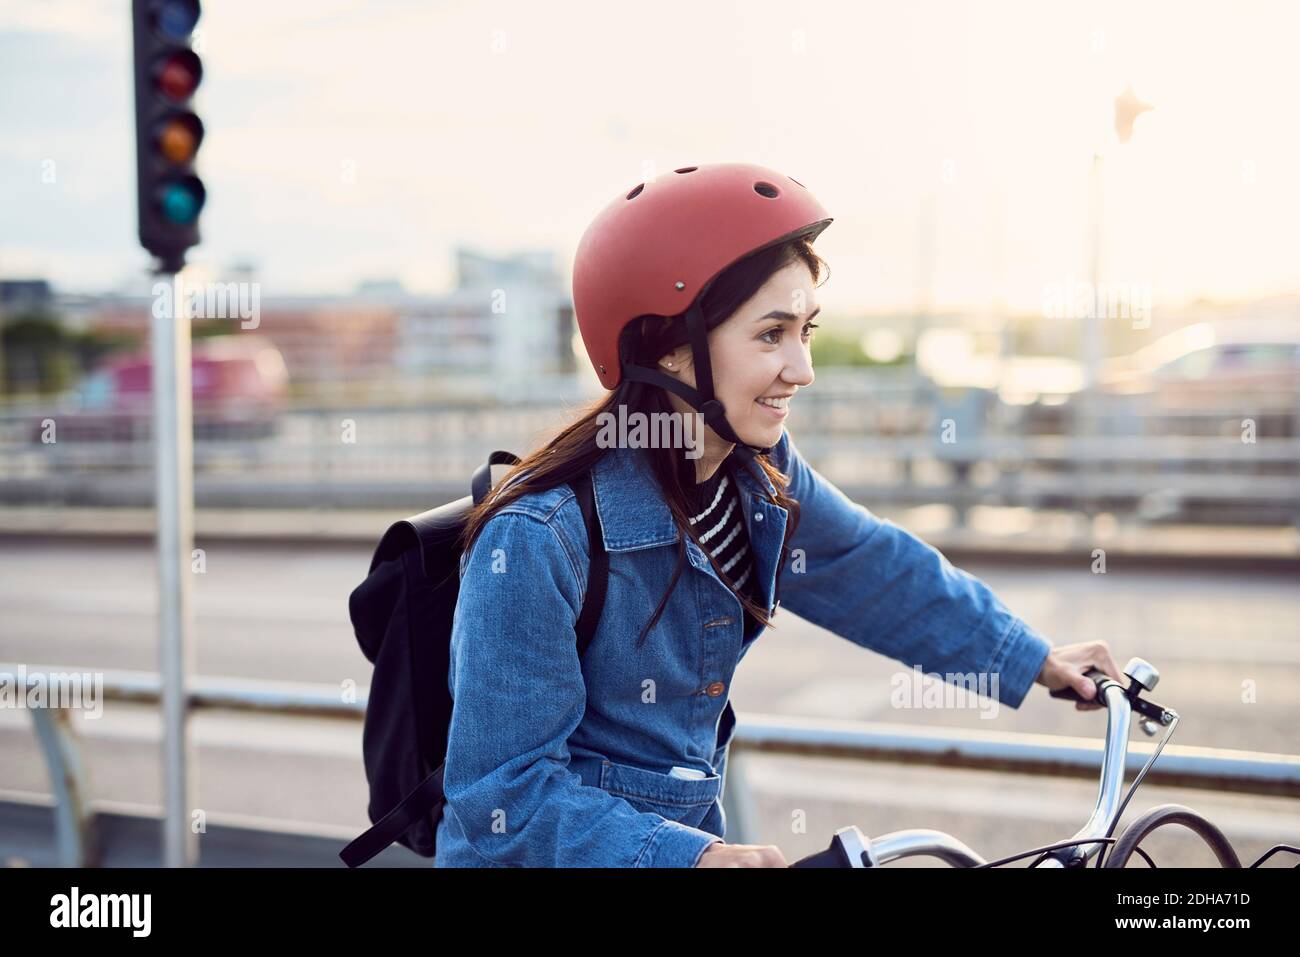 Smiling mid adult woman cycling in city Stock Photo